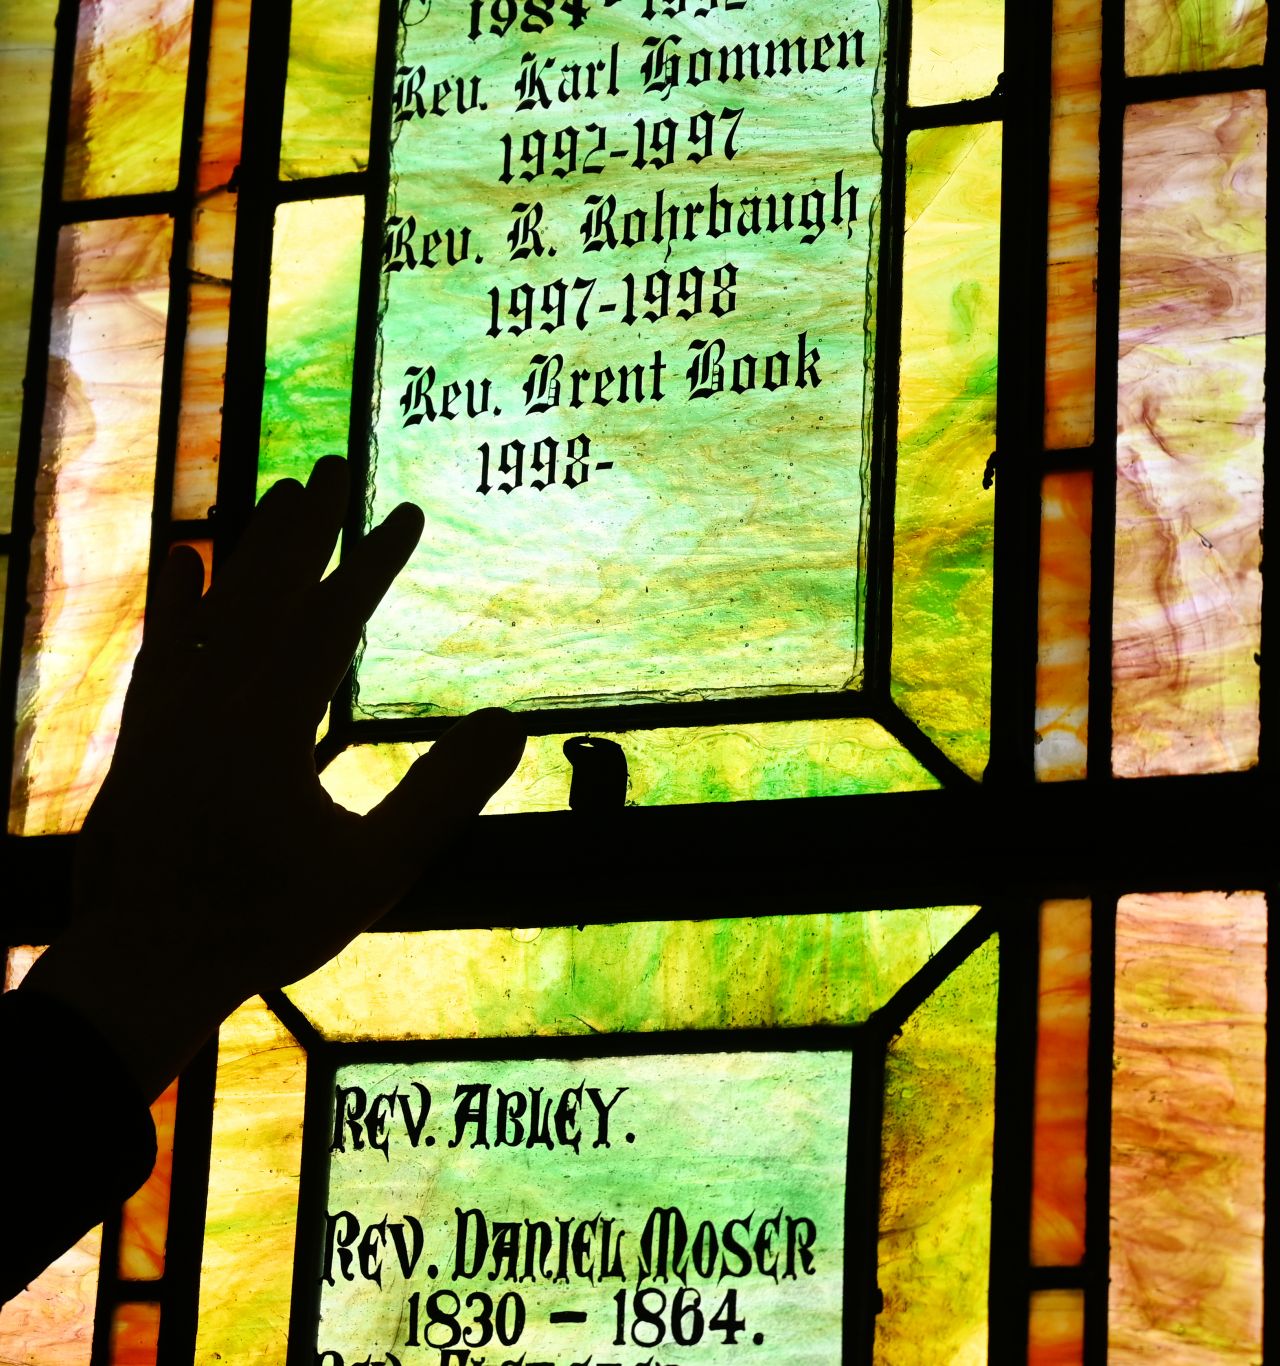 A close-up of a person's left hand against text on a stained-glass window.